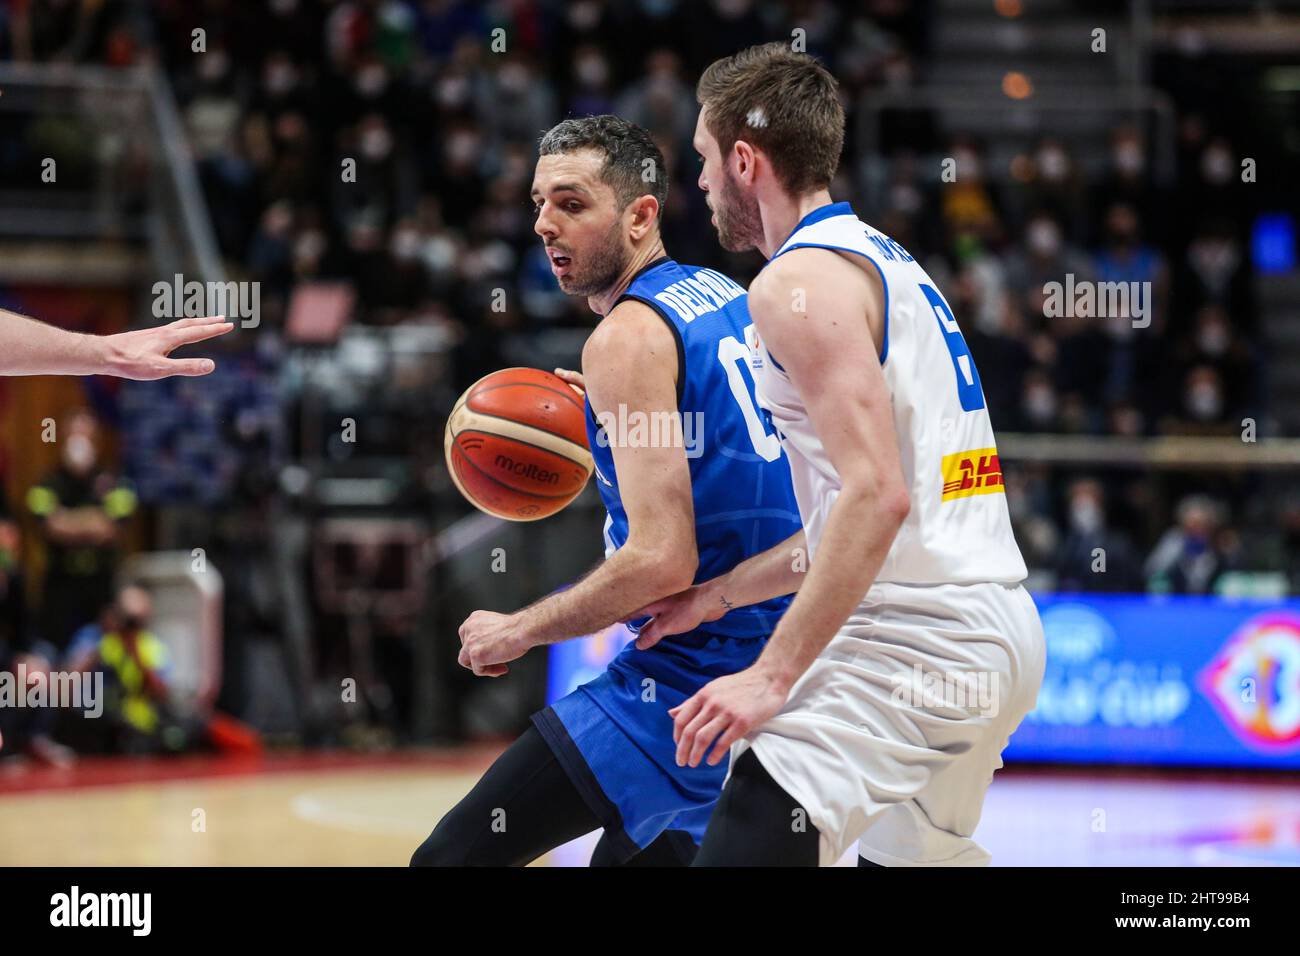 Bologna, Italy. 27th Feb, 2022. Amedeo Della Valle (ITALY) and Jon Axel Gudmundsson (ICELAND) in action during FIBA World Cup Qualifiers - Italy vs Iceland, Iternational Basketball Teams in Bologna, Italy, February 27 2022 Credit: Independent Photo Agency/Alamy Live News Stock Photo